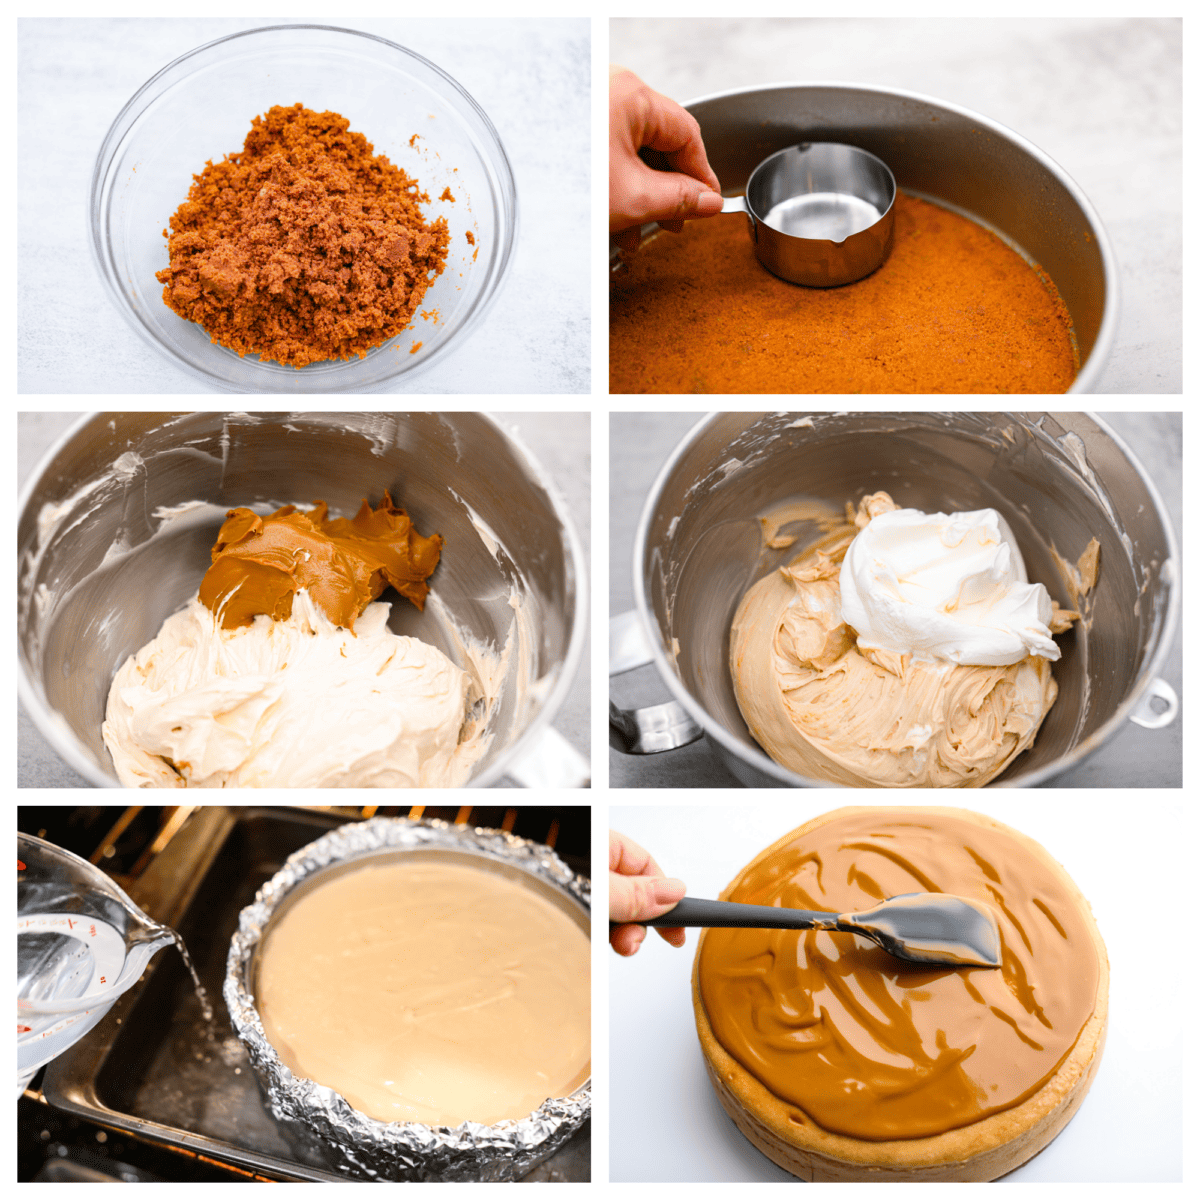 6-photo collage of the crust, cheesecake filling, and topping being prepared.